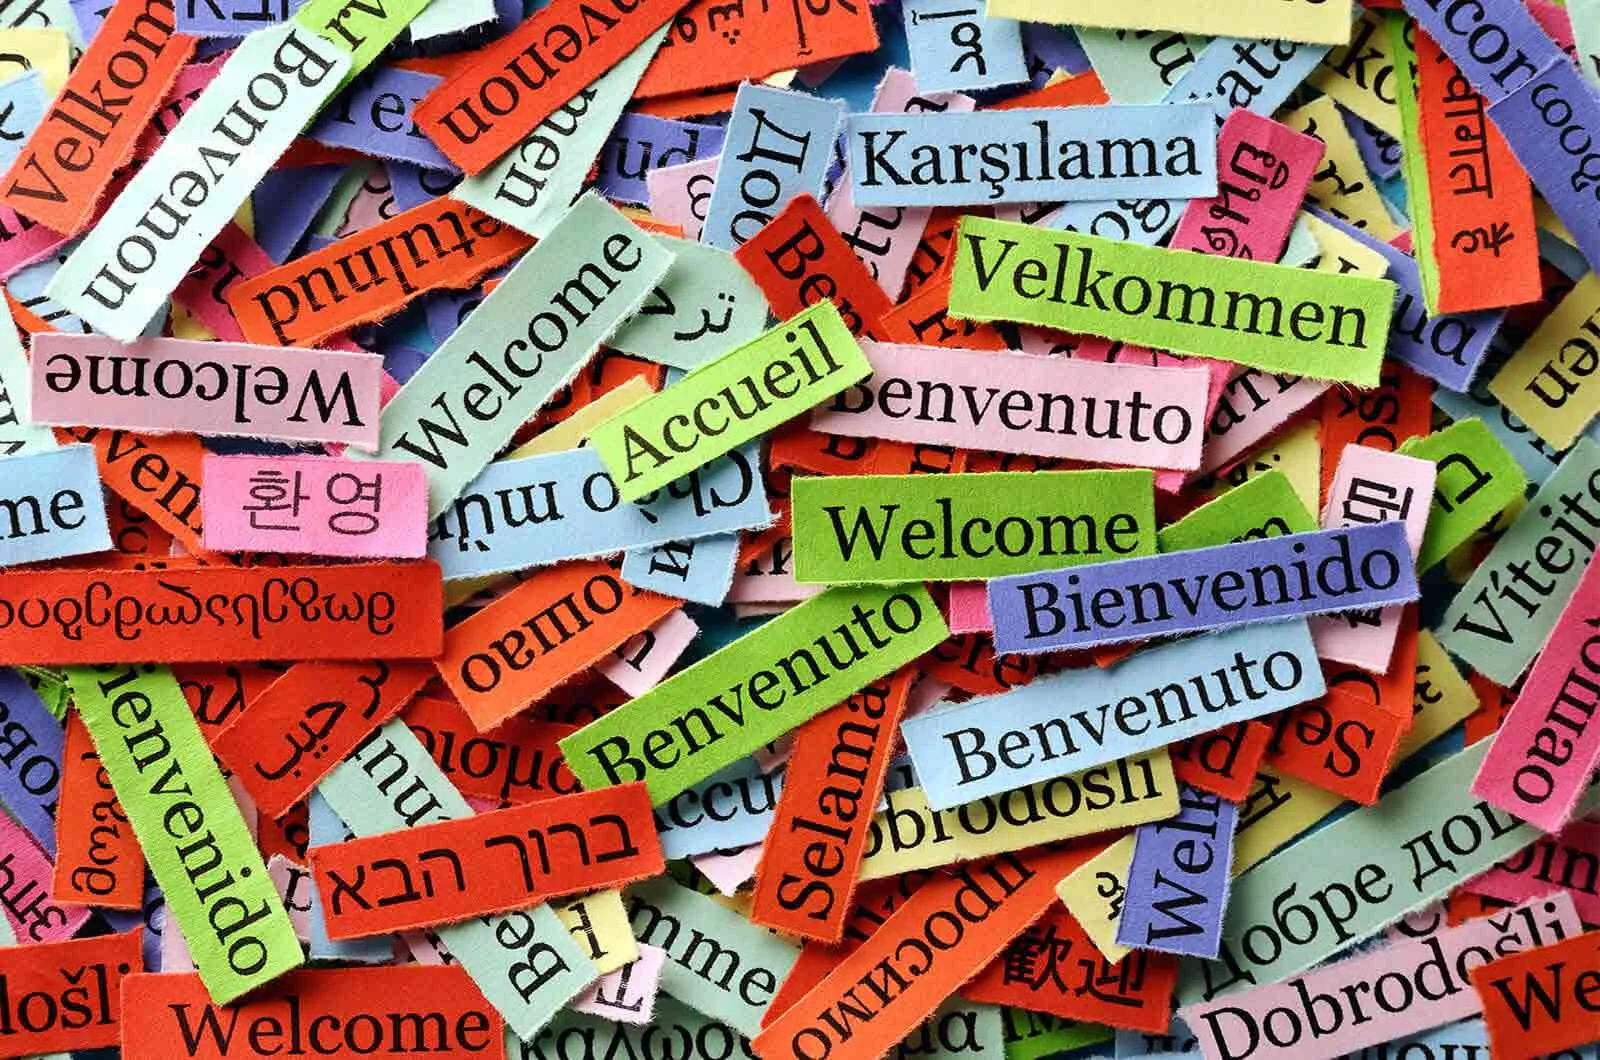 The word “welcome” written in different languages on small coloured scraps.